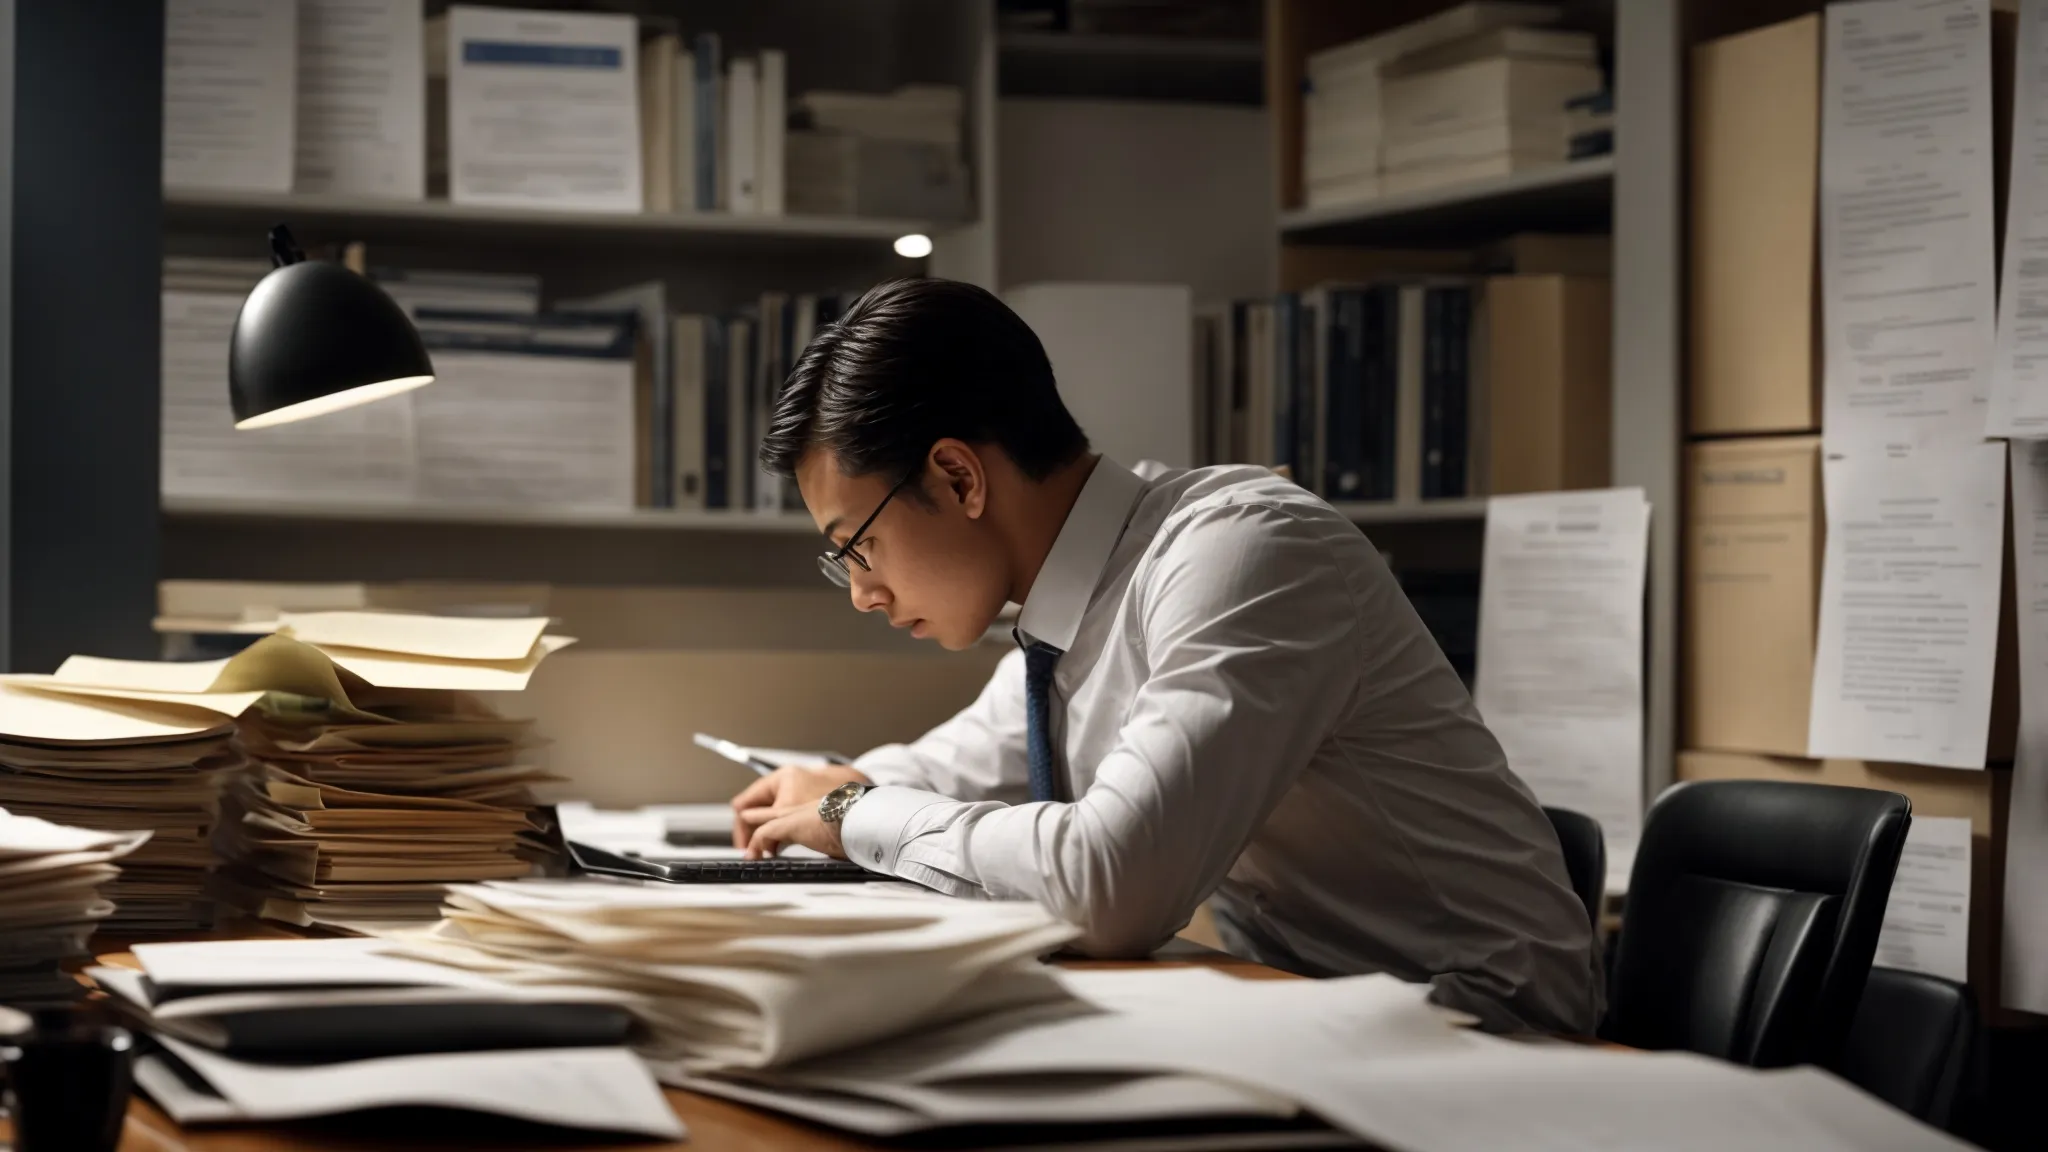 a focused individual sitting at a desk surrounded by documents, deeply absorbed in drafting a resume on a computer.